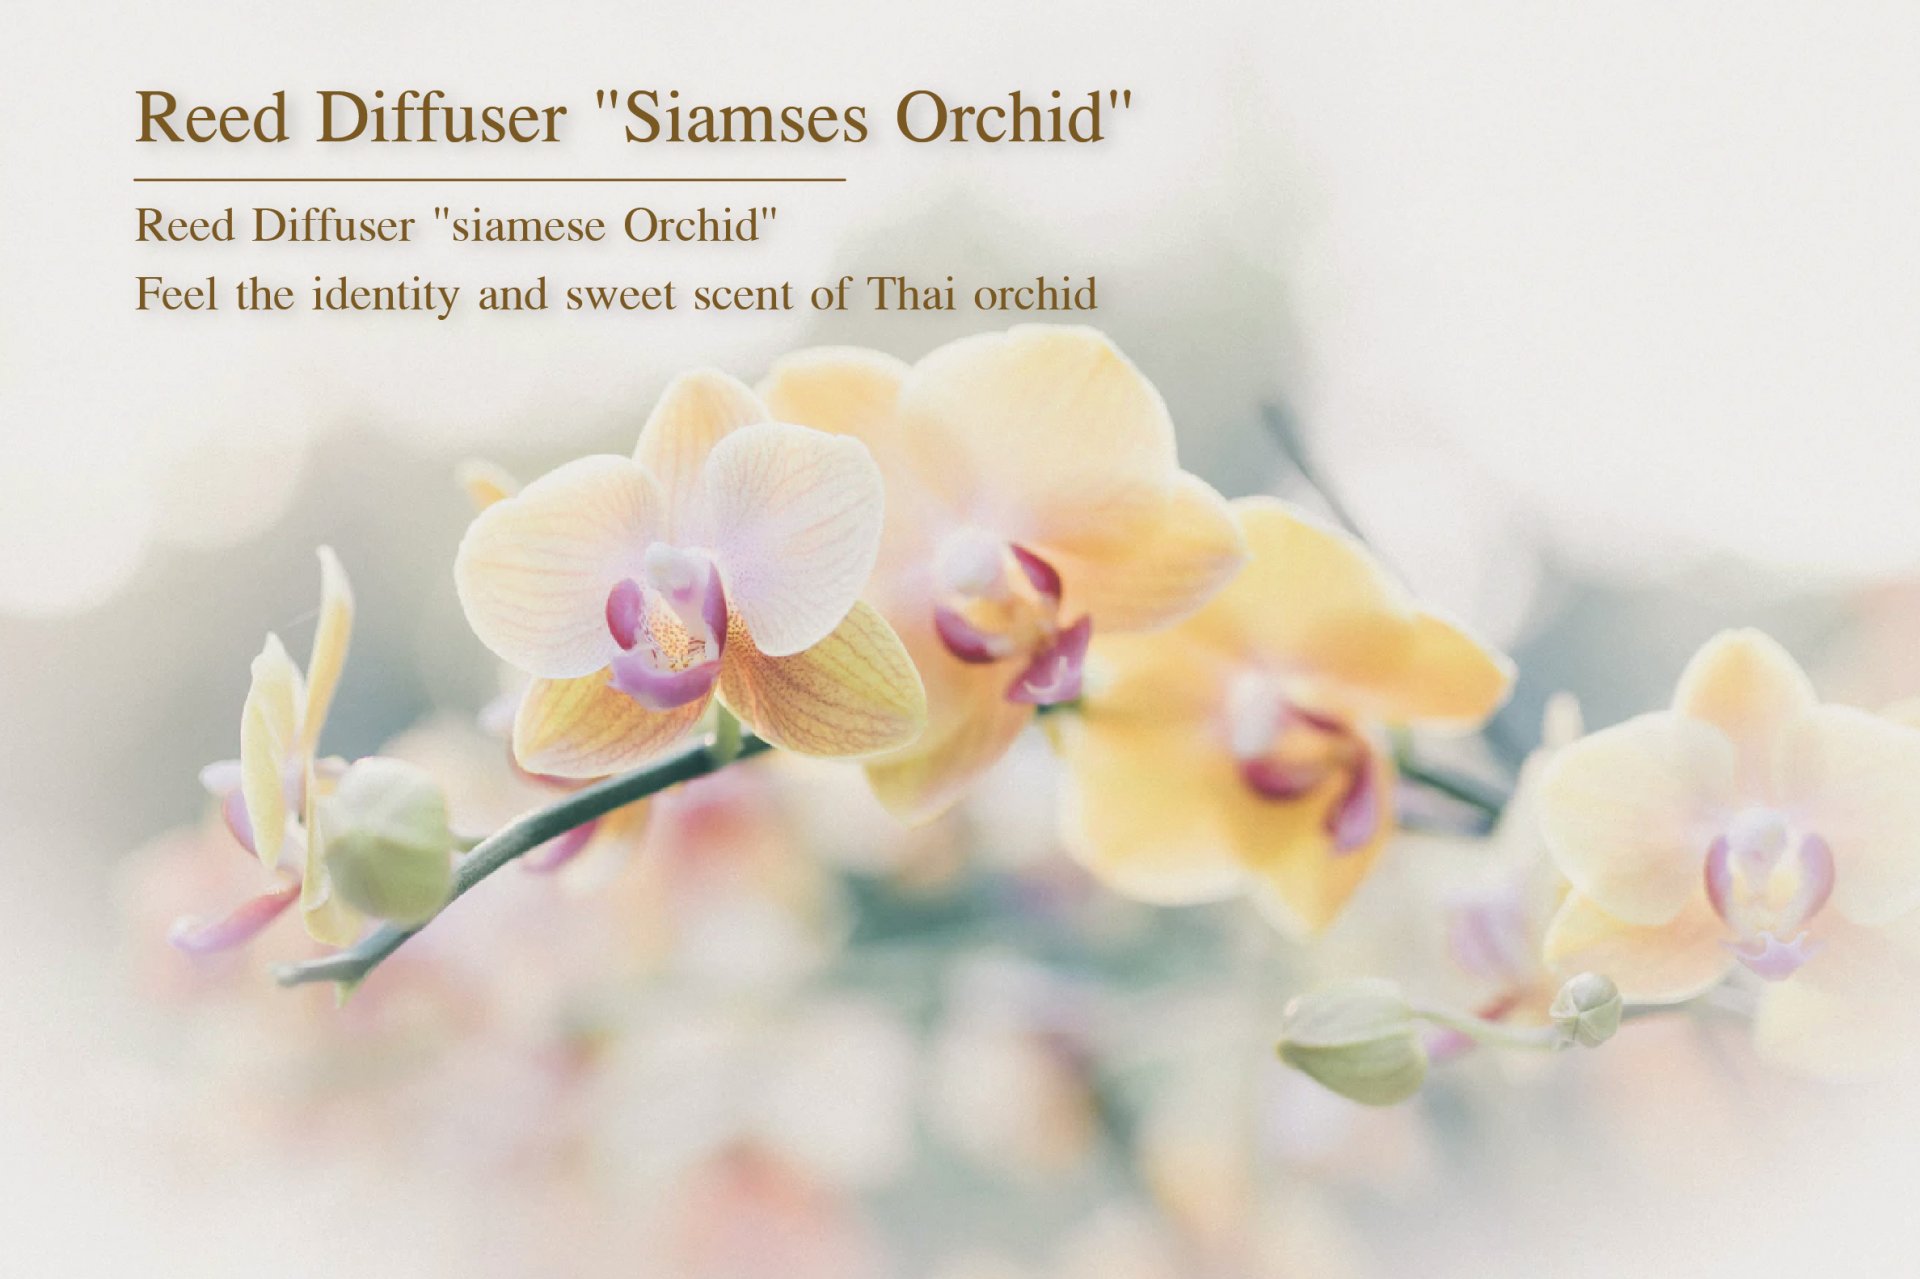 Reed Diffuser "siamese Orchid" Feel the identity and sweet scent of Thai orchid.